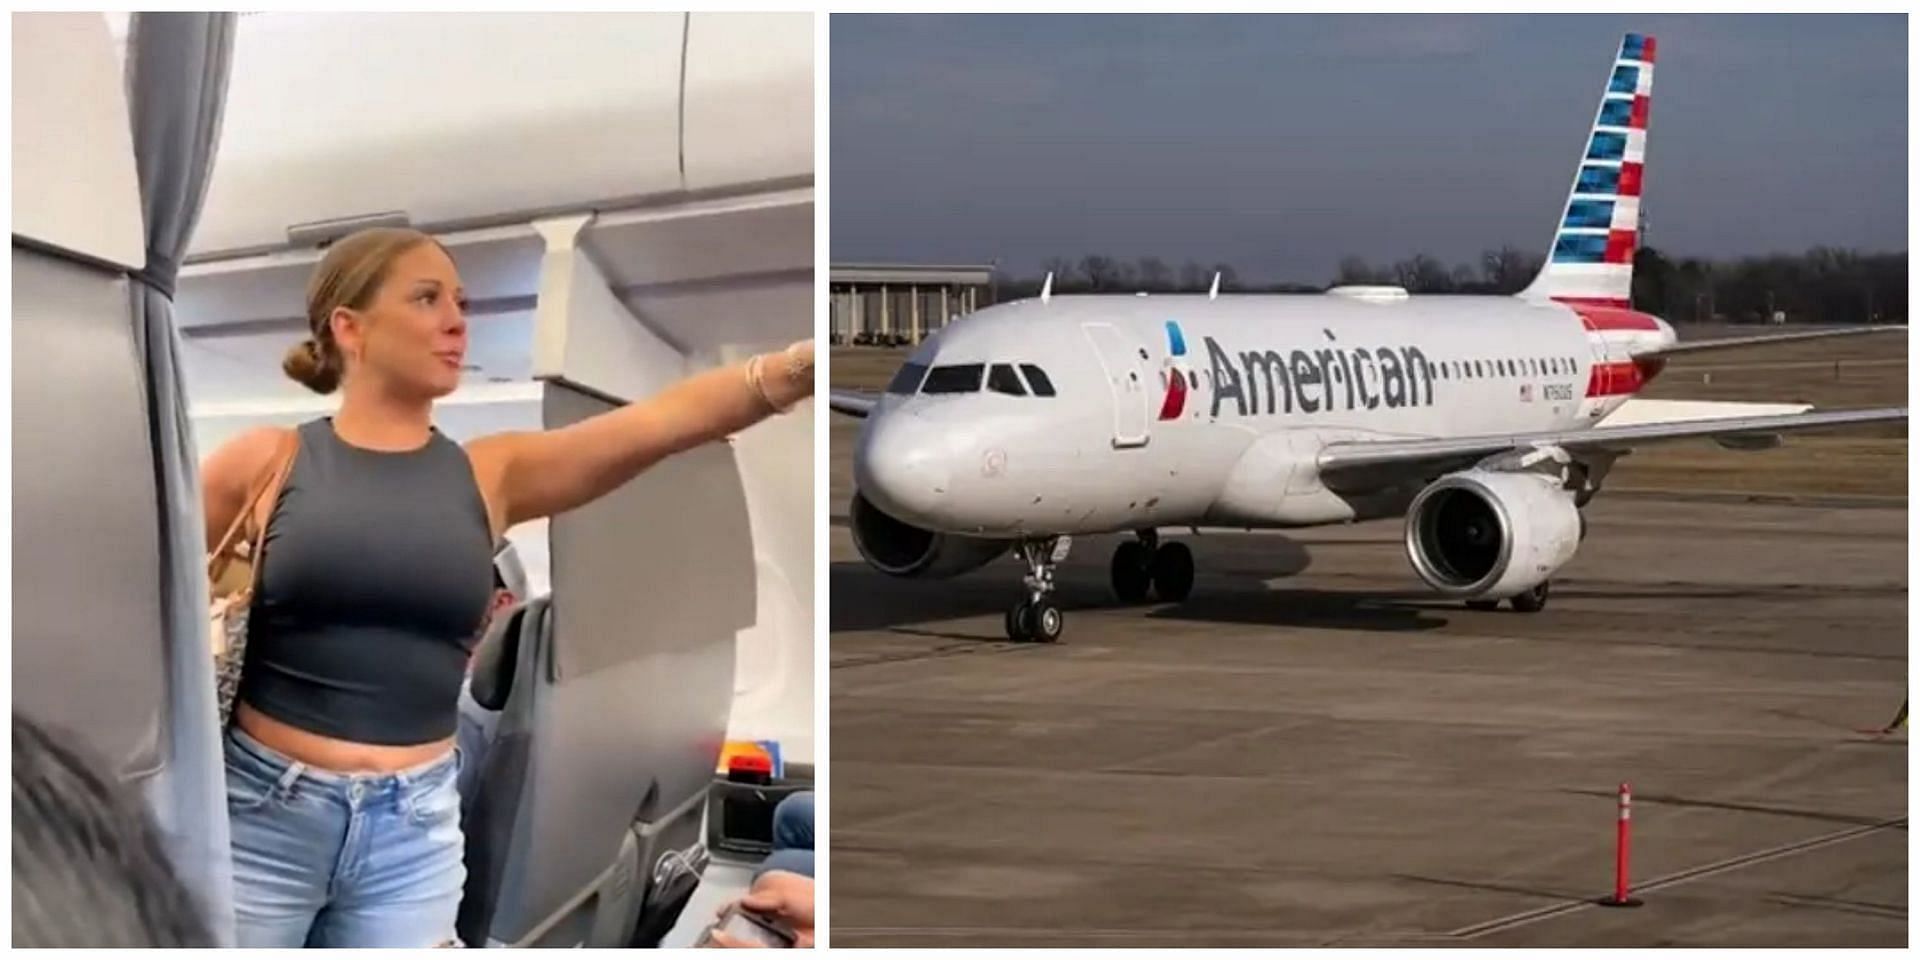 The woman who went viral after her video from American Airlines made way on social media has been identified as Tiffany Gomes. (Image via Twitter)